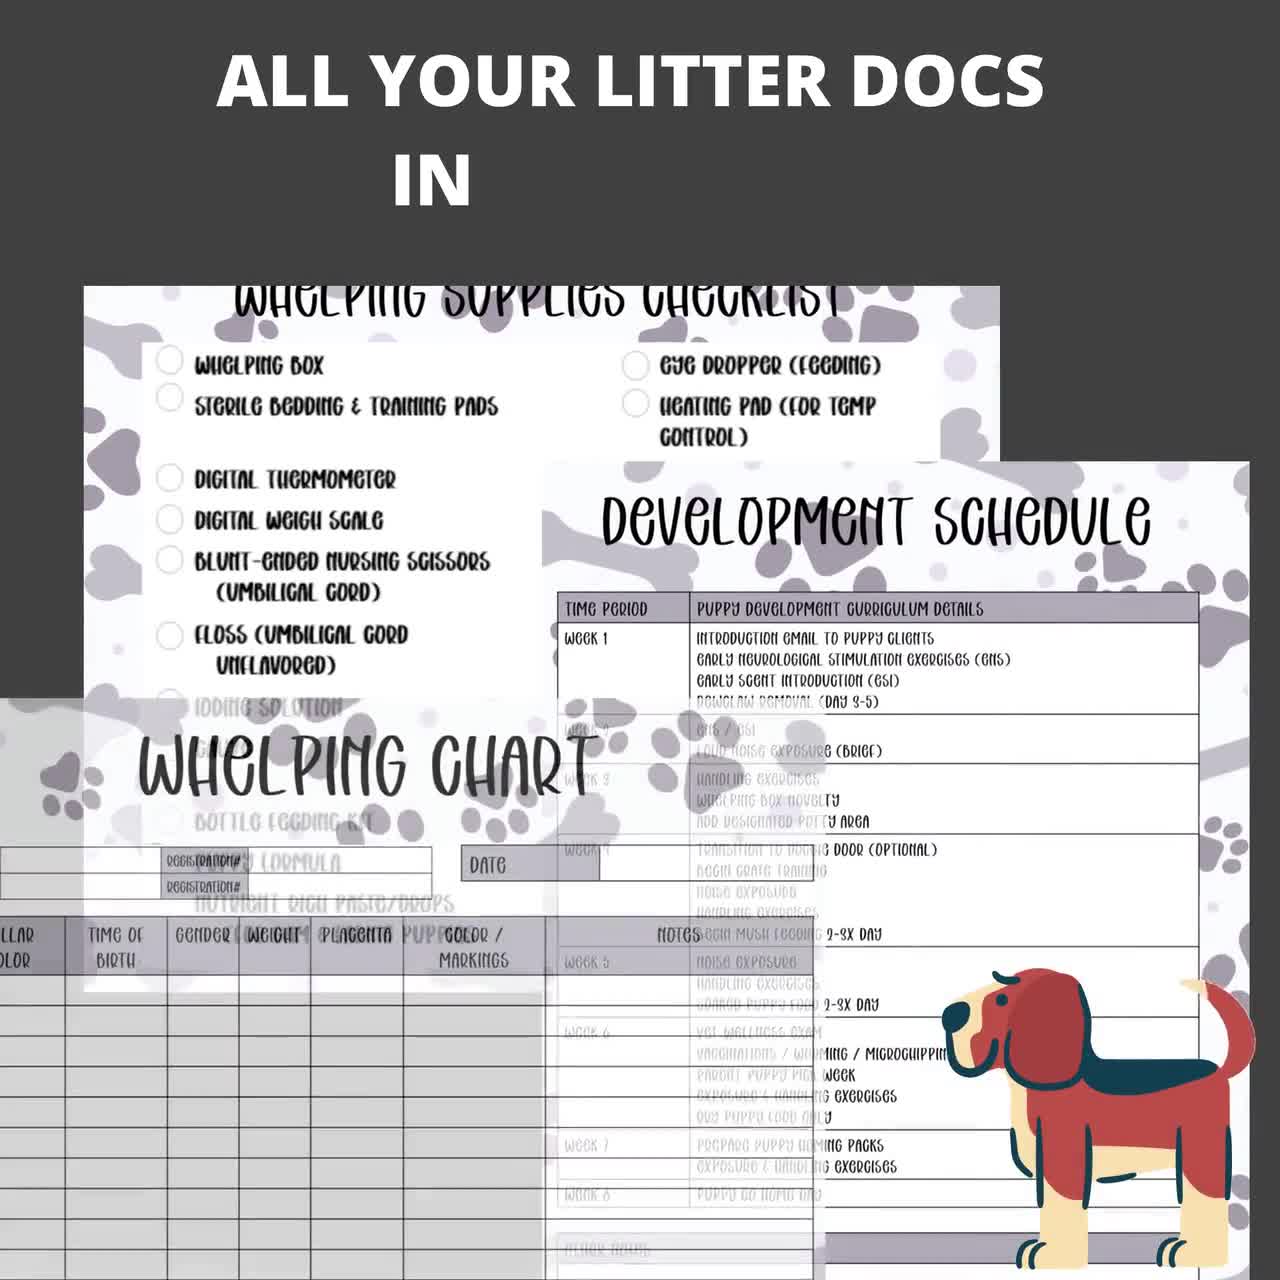 Whelping Checklist - What Supplies Do You Need Before Your Dog Has A Litter  Of Puppies? - Puppy In Training